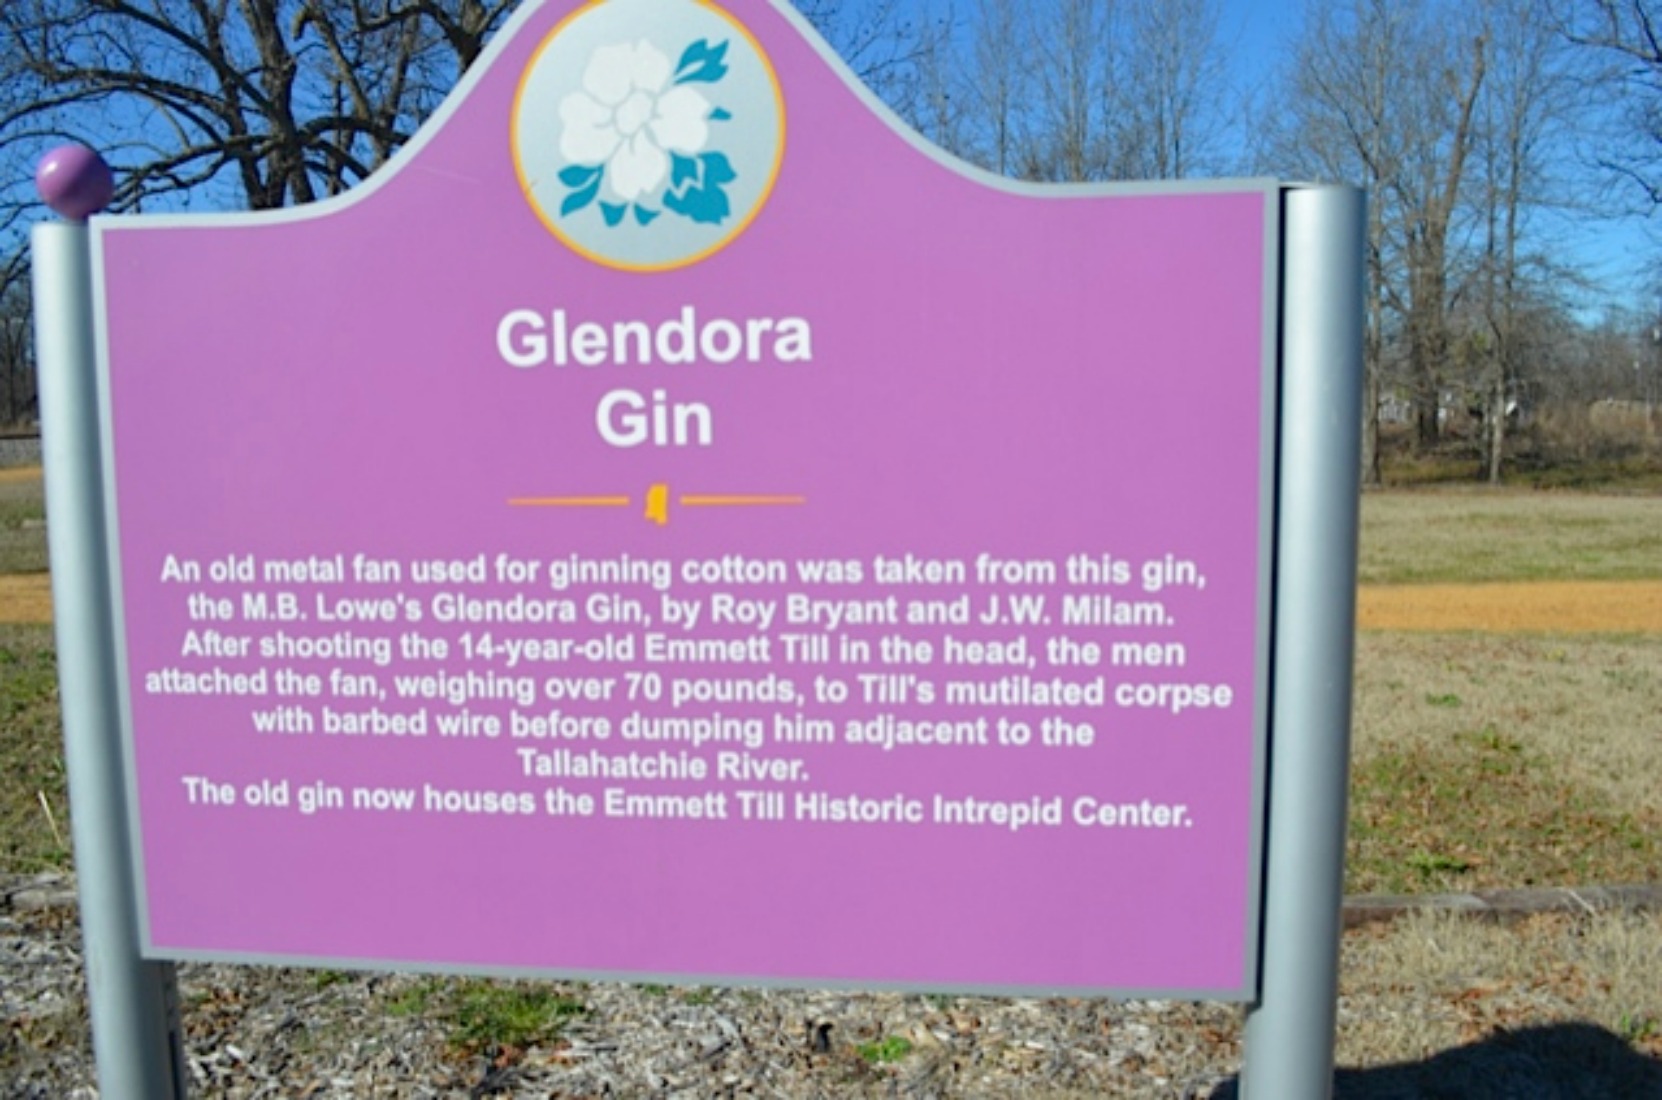 Glendora Gin sign, near the site of the former house of J.W. Milam, one of the two men who murdered Emmett Till in August 1955, Glendora, Mississippi (courtesy of Keith Petersen)